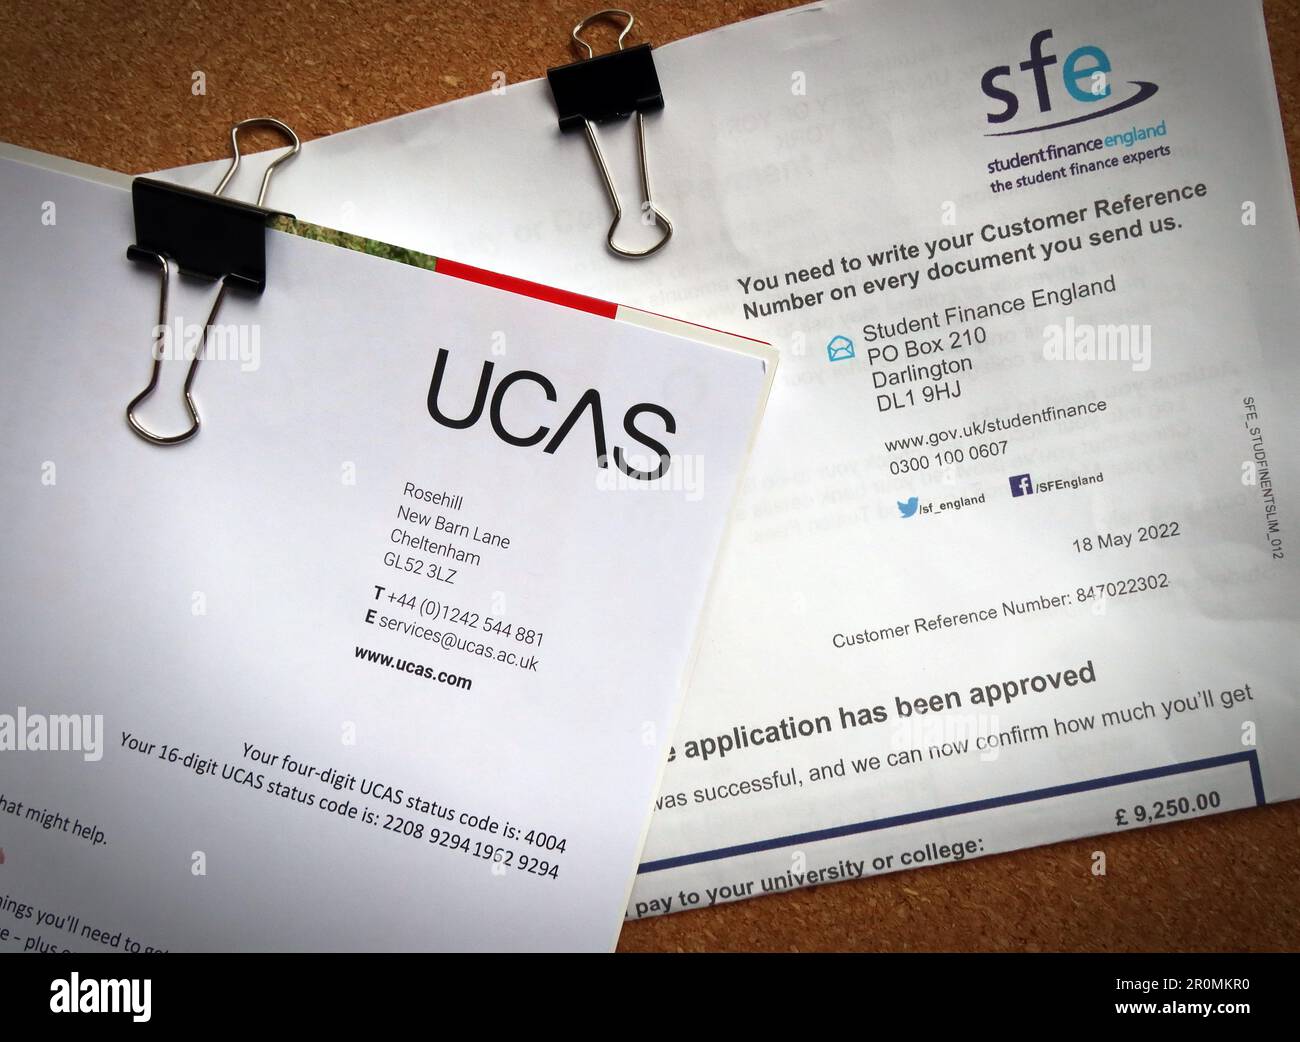 UCAS and SFE Student Finance applications, for university and further education places Stock Photo